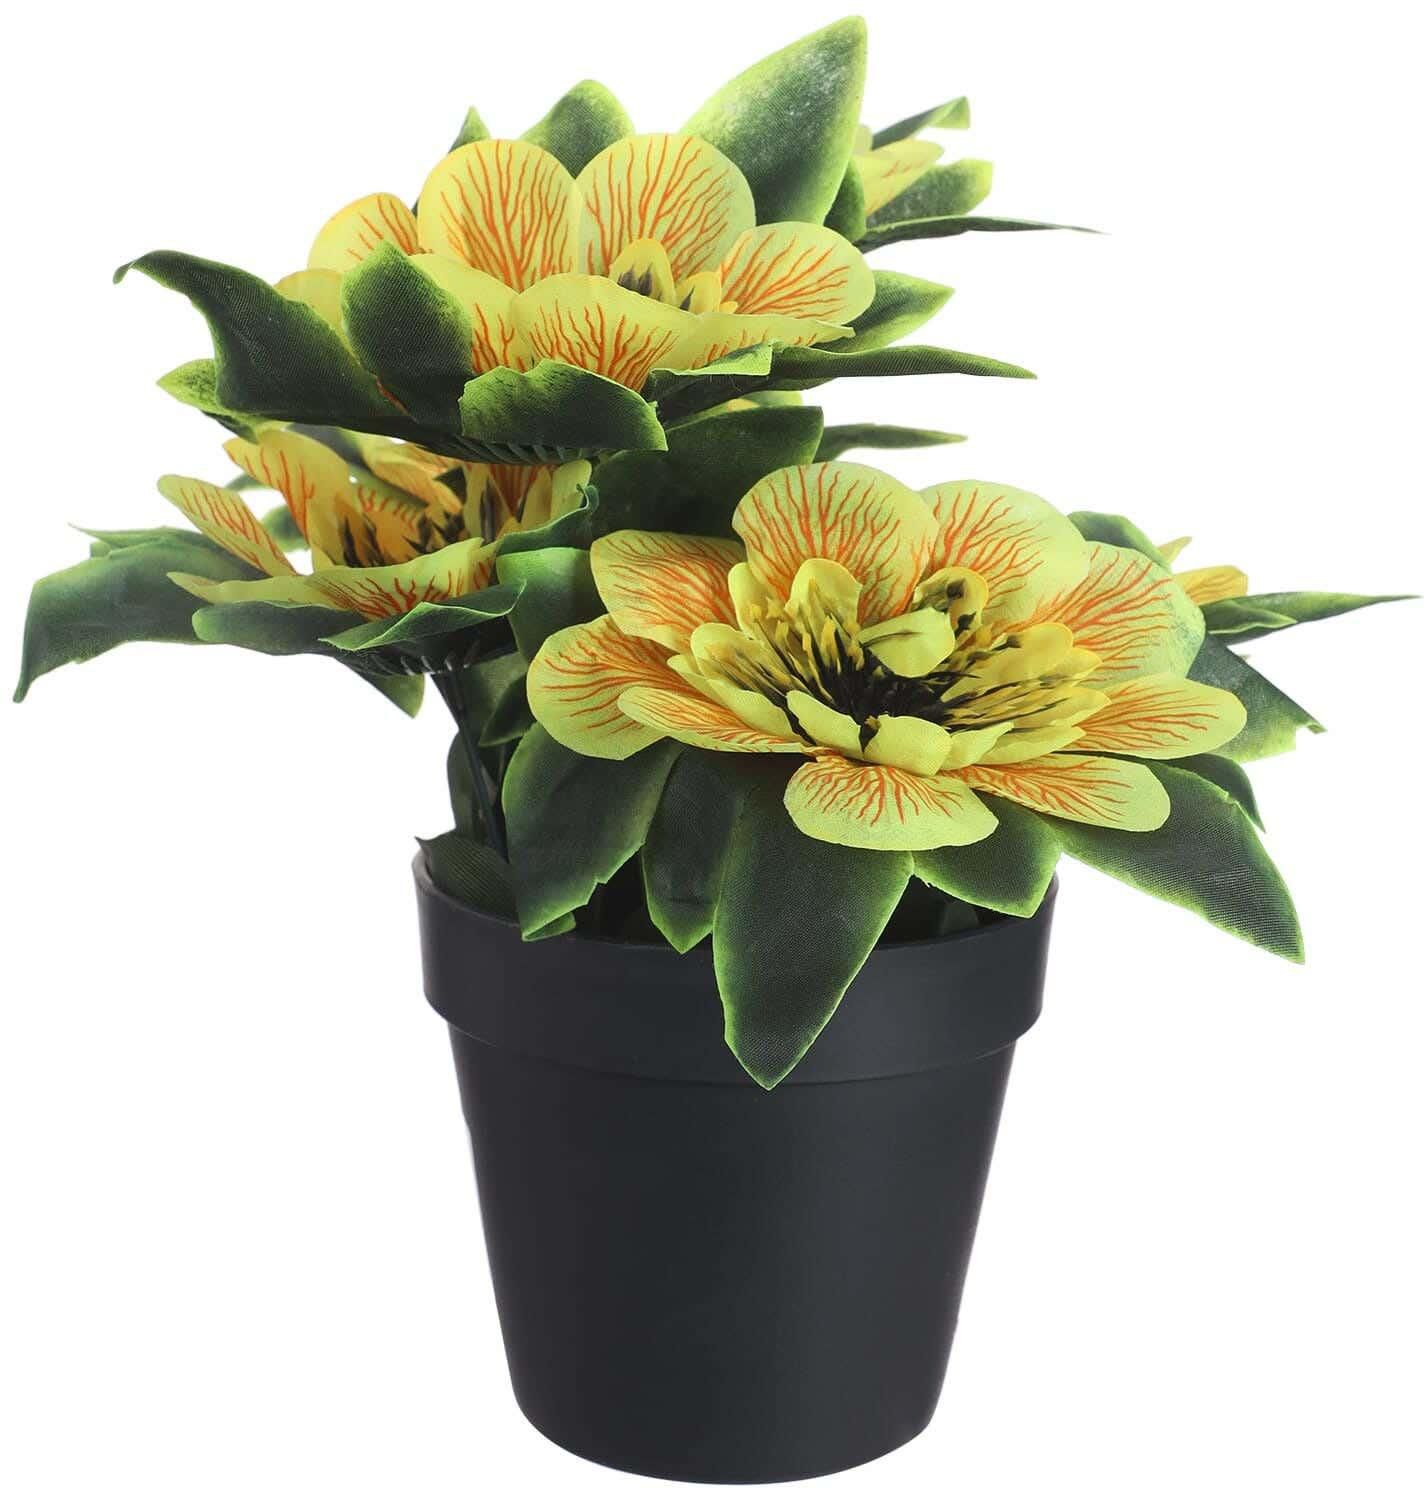 Get Plastic Round Vase With Flowers, 12 Cm - Yellow with best offers | Raneen.com